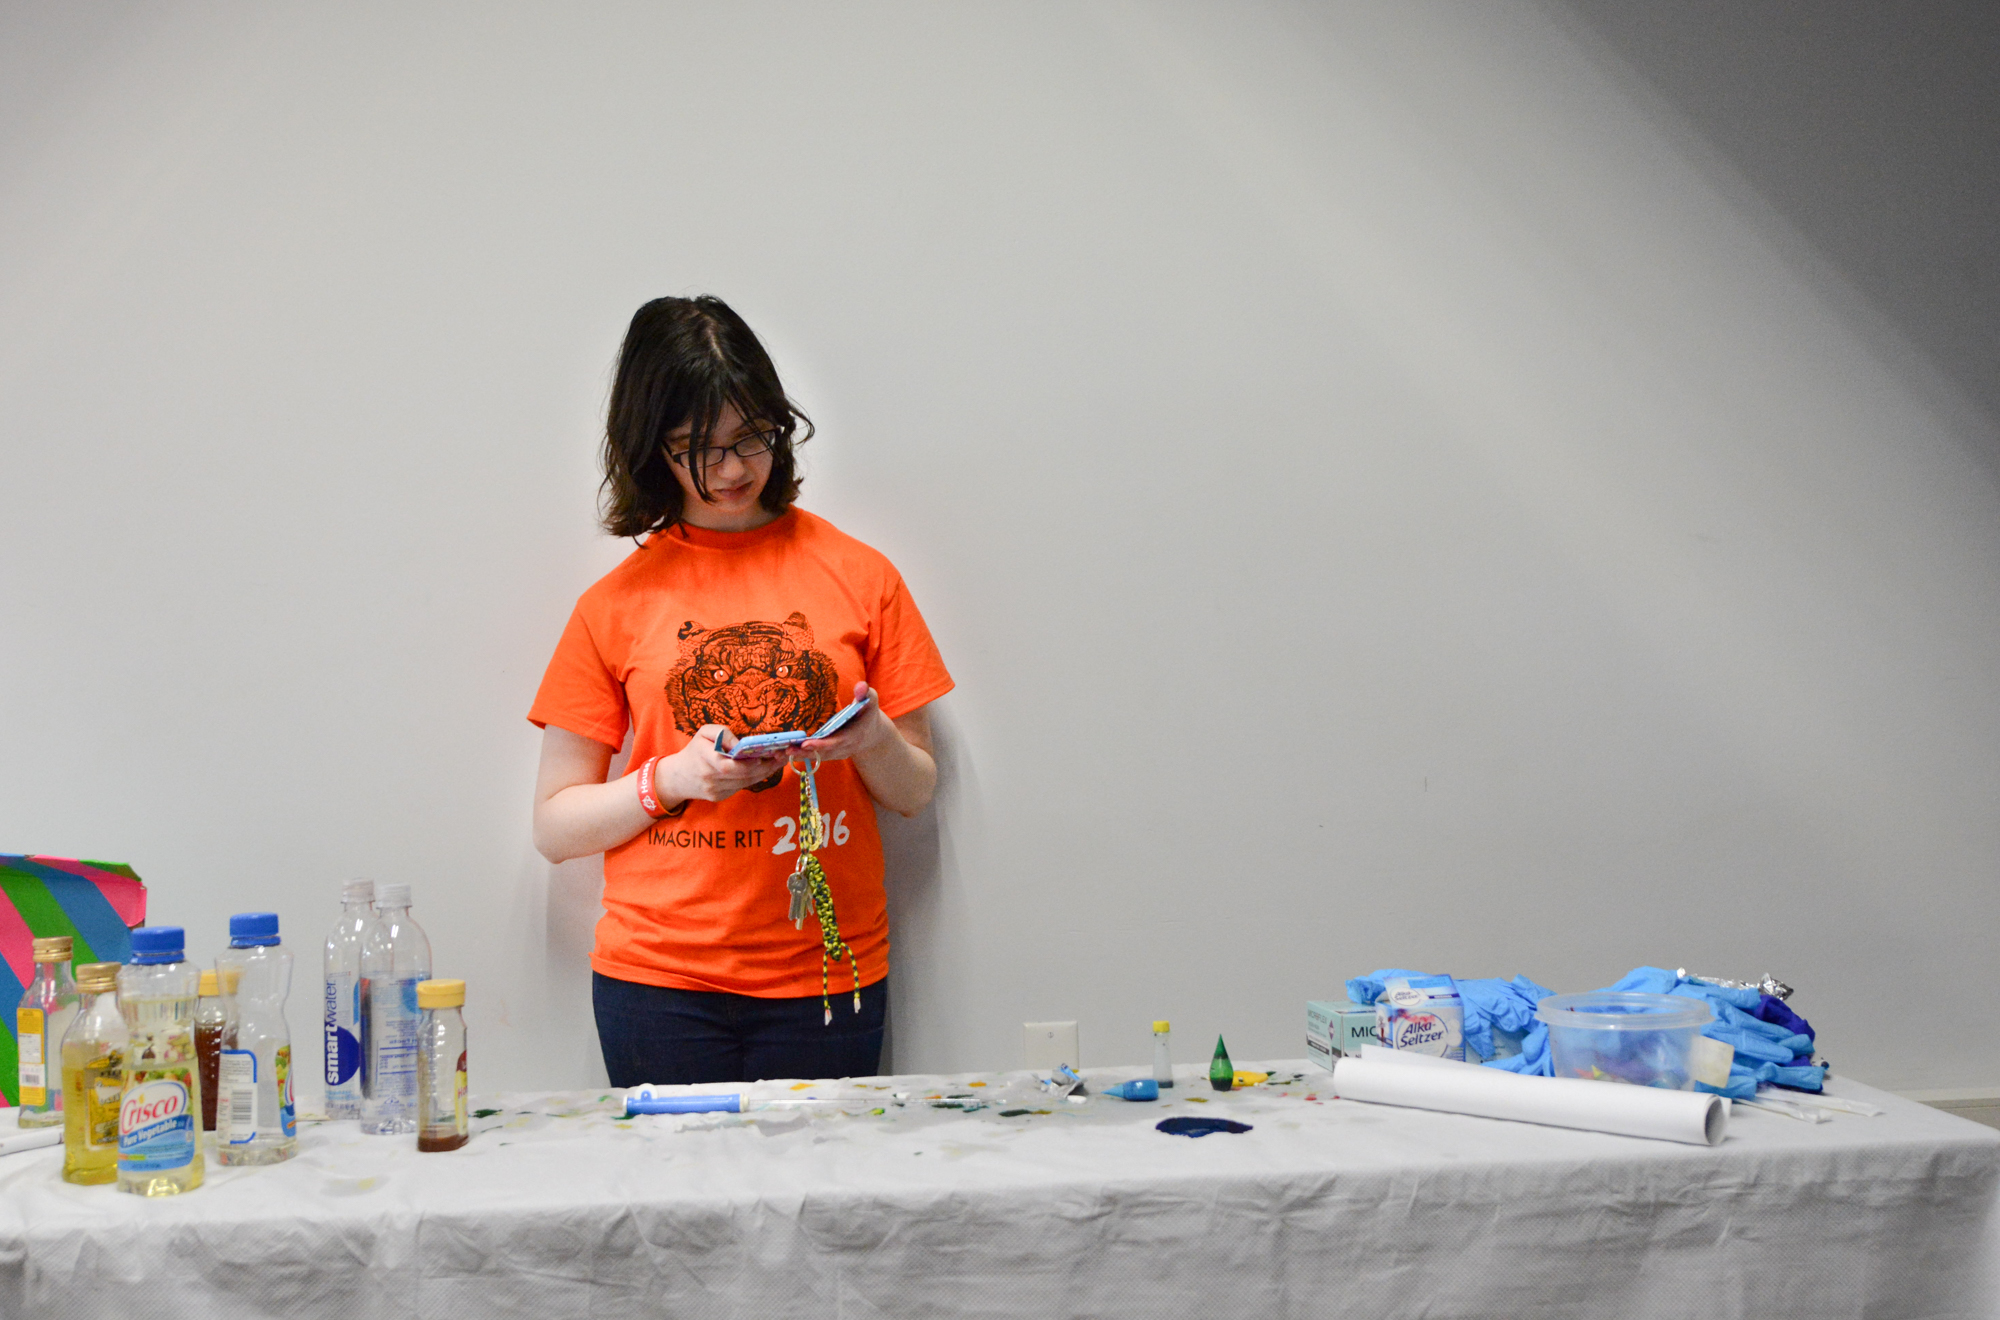 Hahah Berga, a second year Biology student, waits for new supplies for her liquid classification demonstration, during Imagine RIT: Innovation and Creativity Festival on the Rochester Institute of Technology campus in Rochester, N.Y., May 7, 2016. (Photo by Boris Shirman) #imaginerit #ritpj